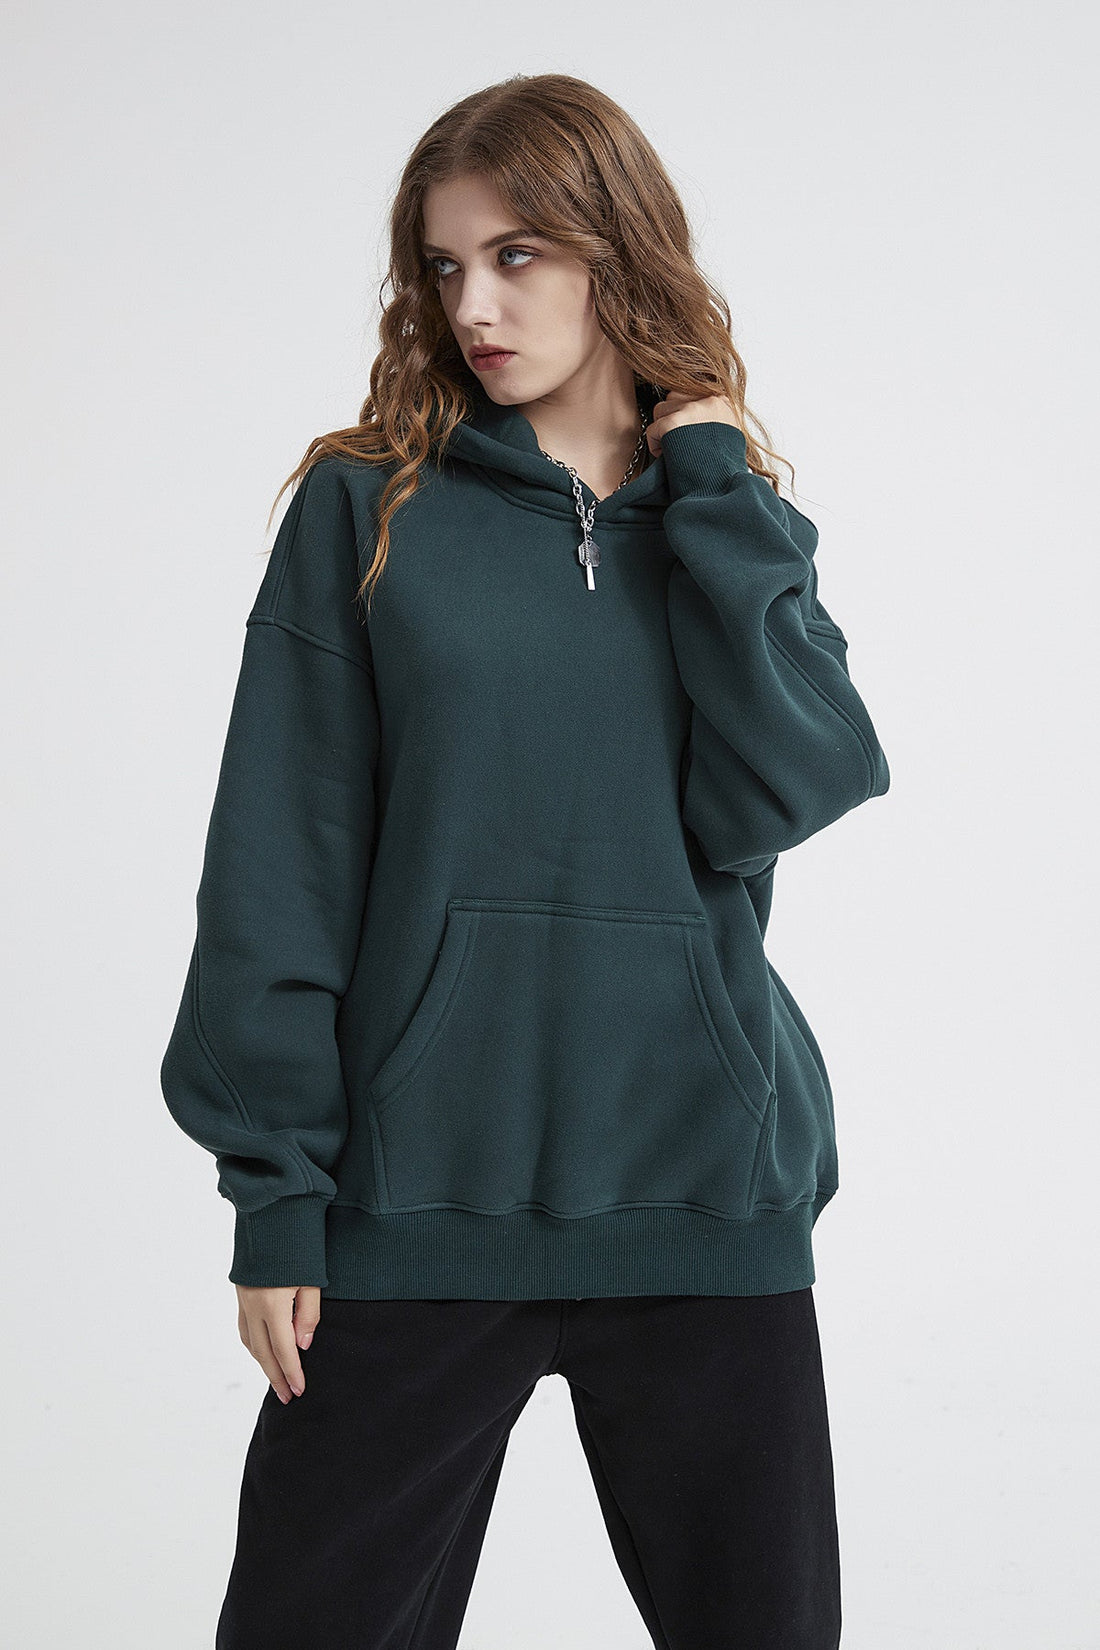 Solid Color Basic Women Hoodie